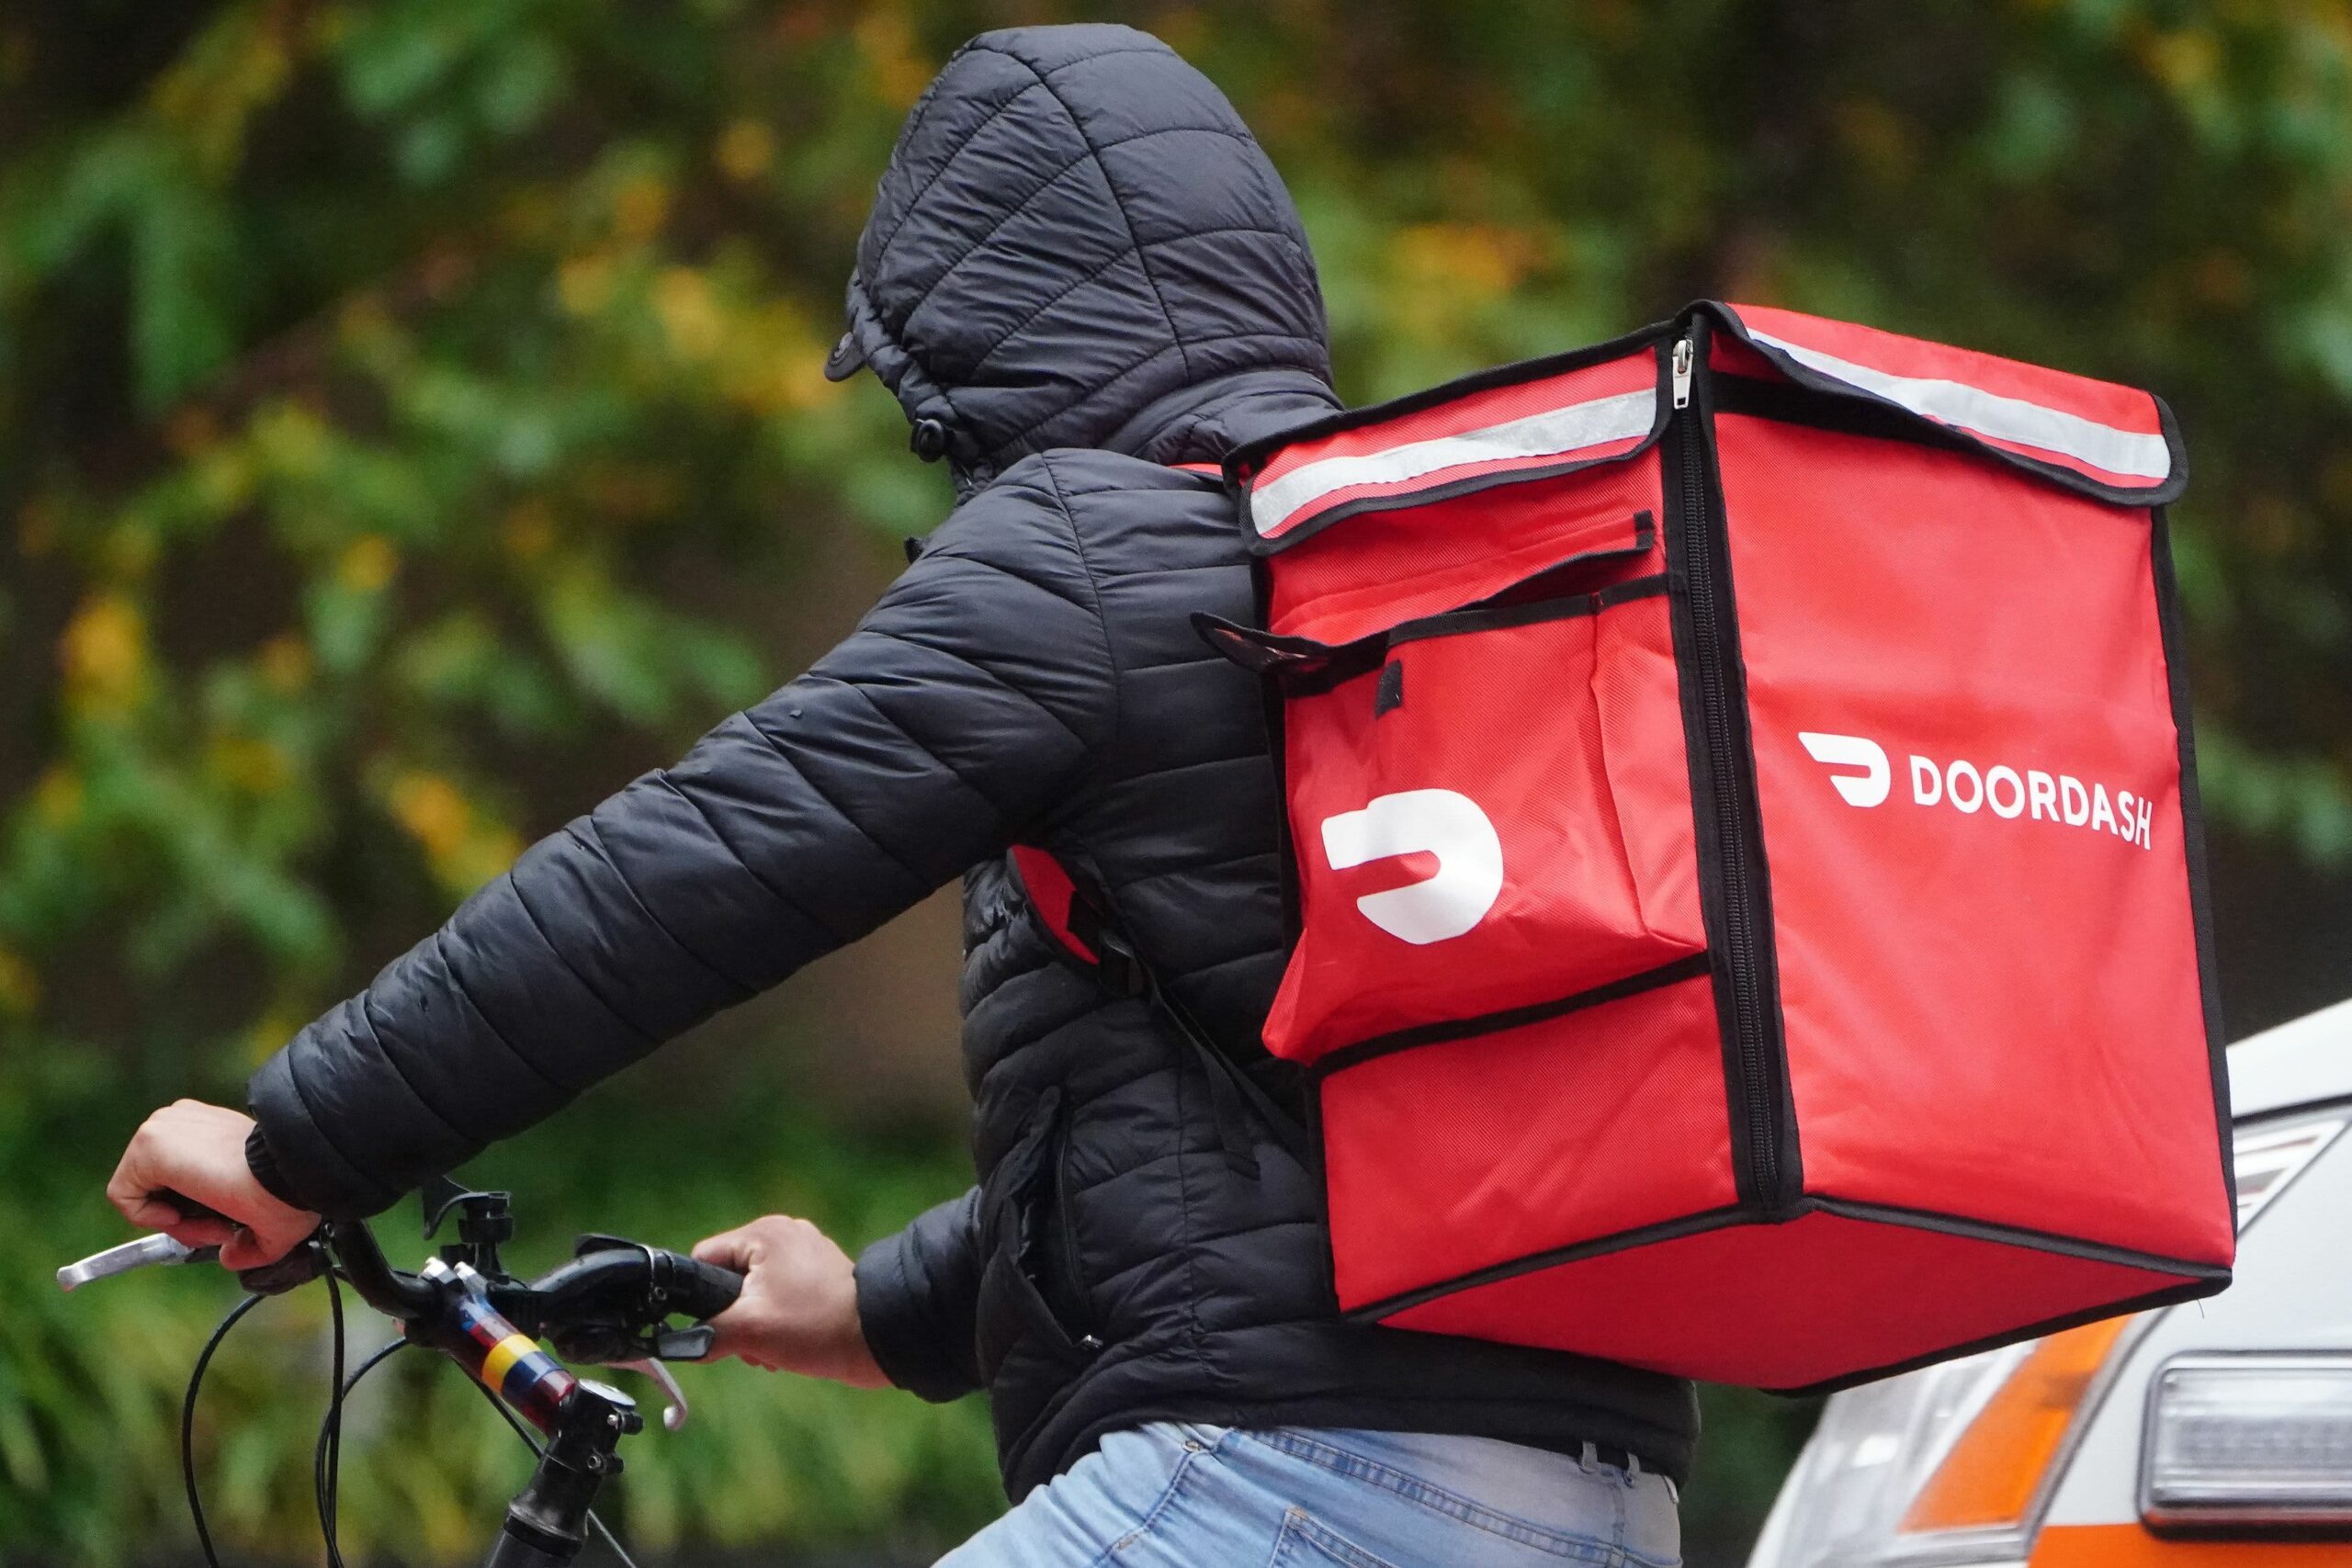 Analysts say hold shopping for shares DoorDash & Verra Mobility